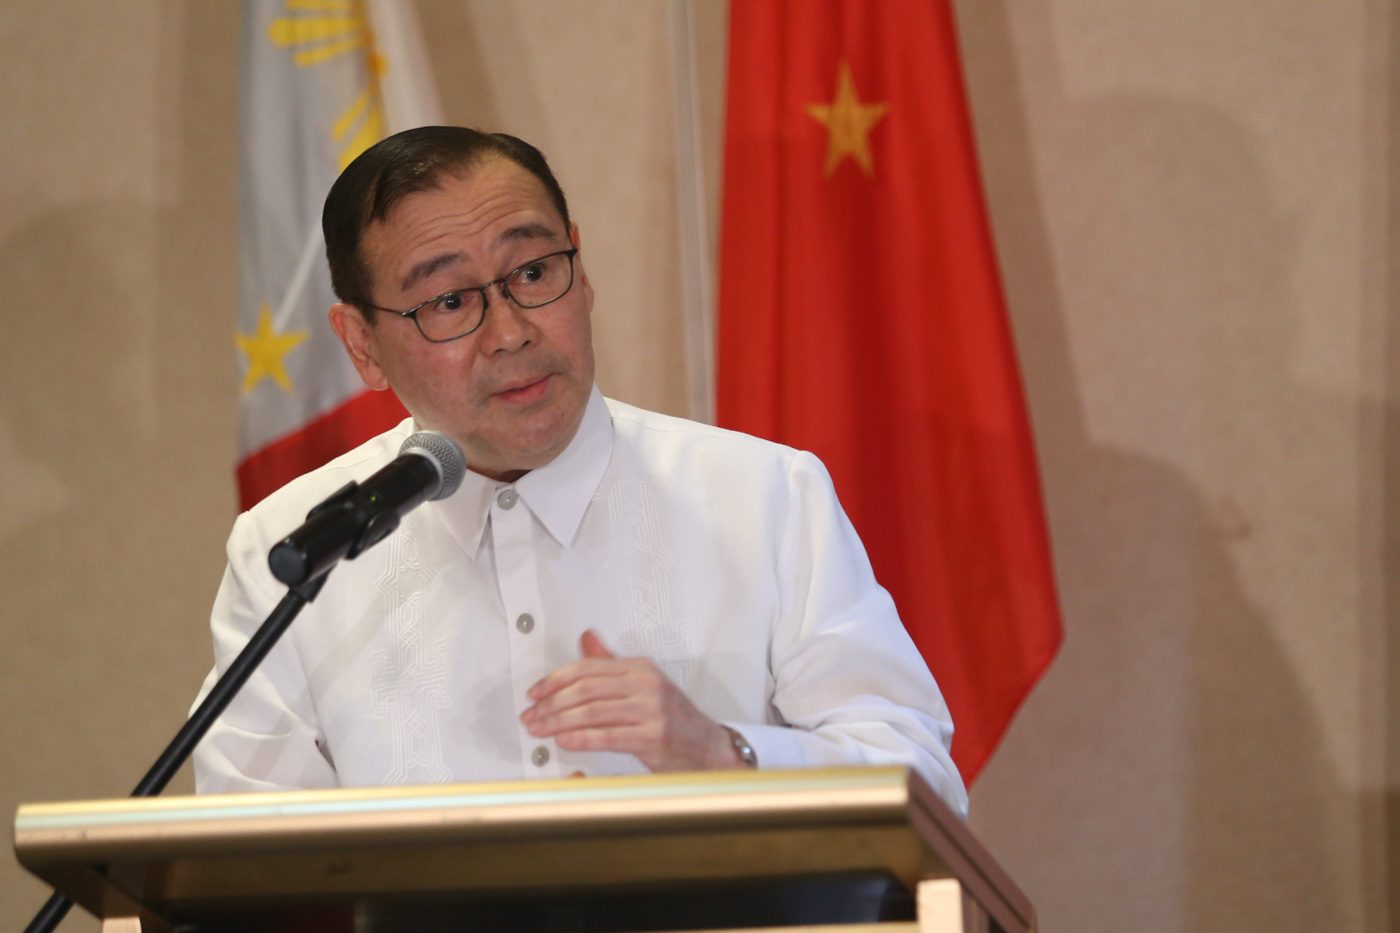 Locsin: Independent foreign policy not simply switching masters